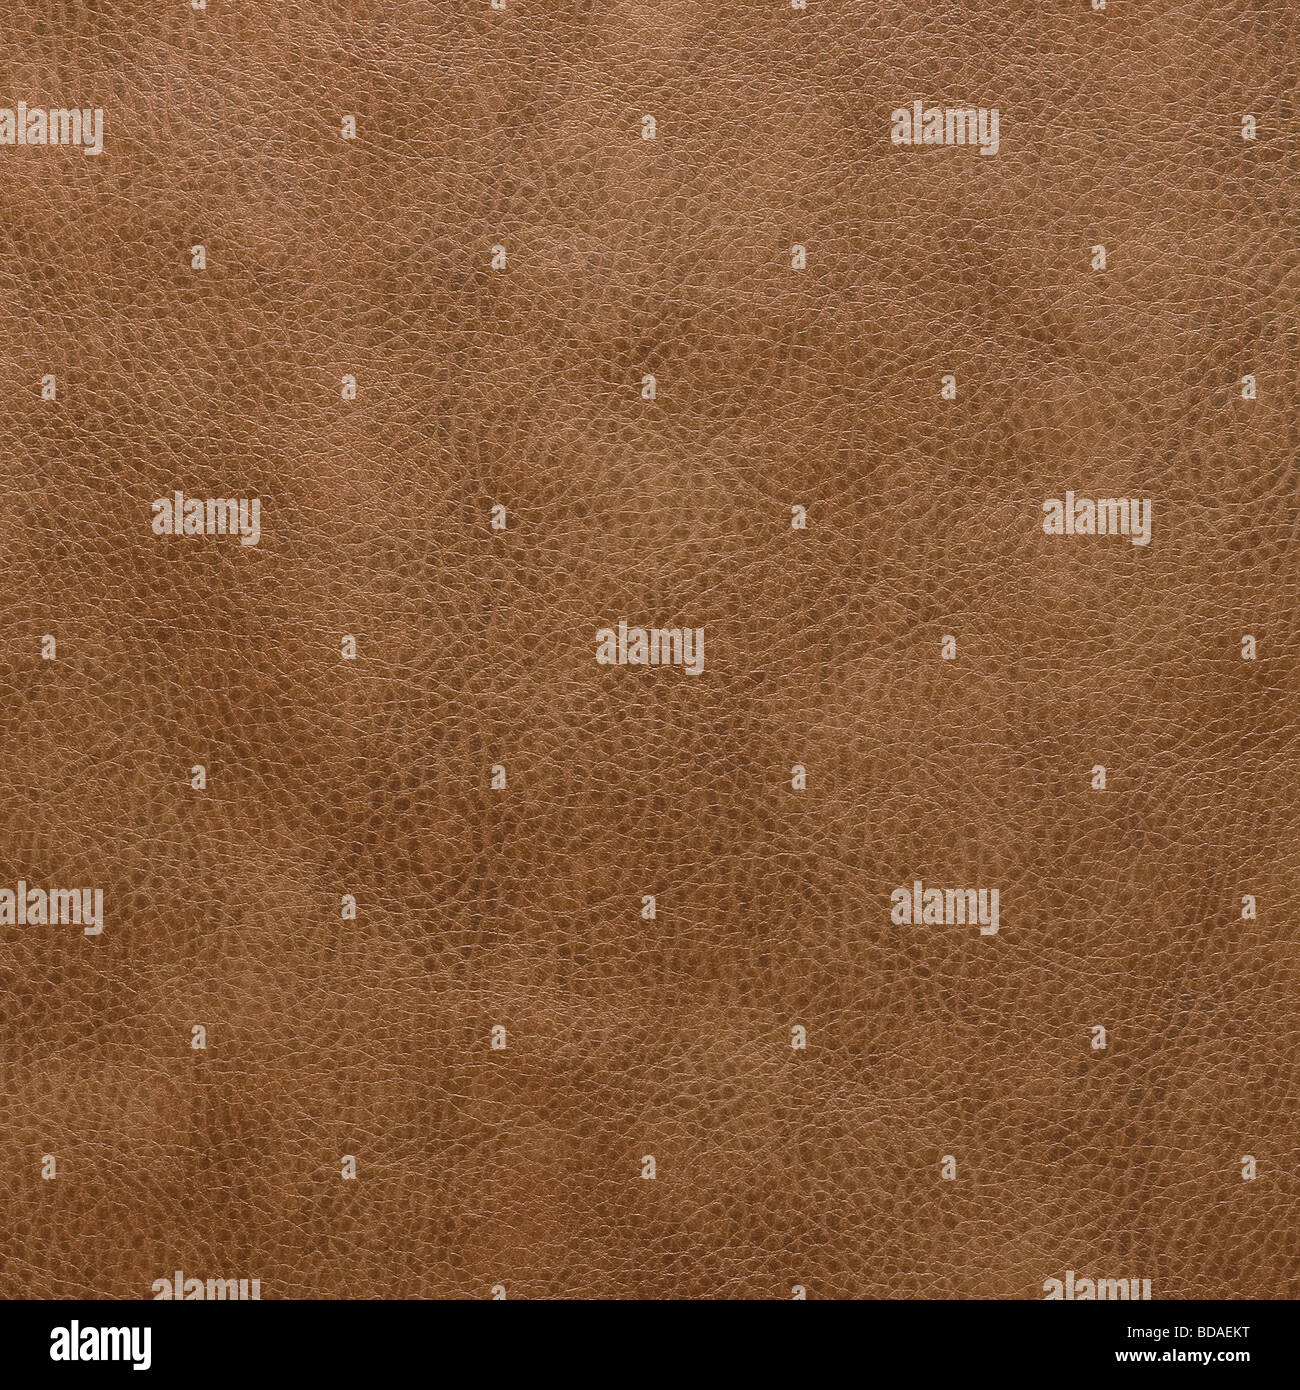 TAN BROWN LEATHER BACKGROUND Stock Photo